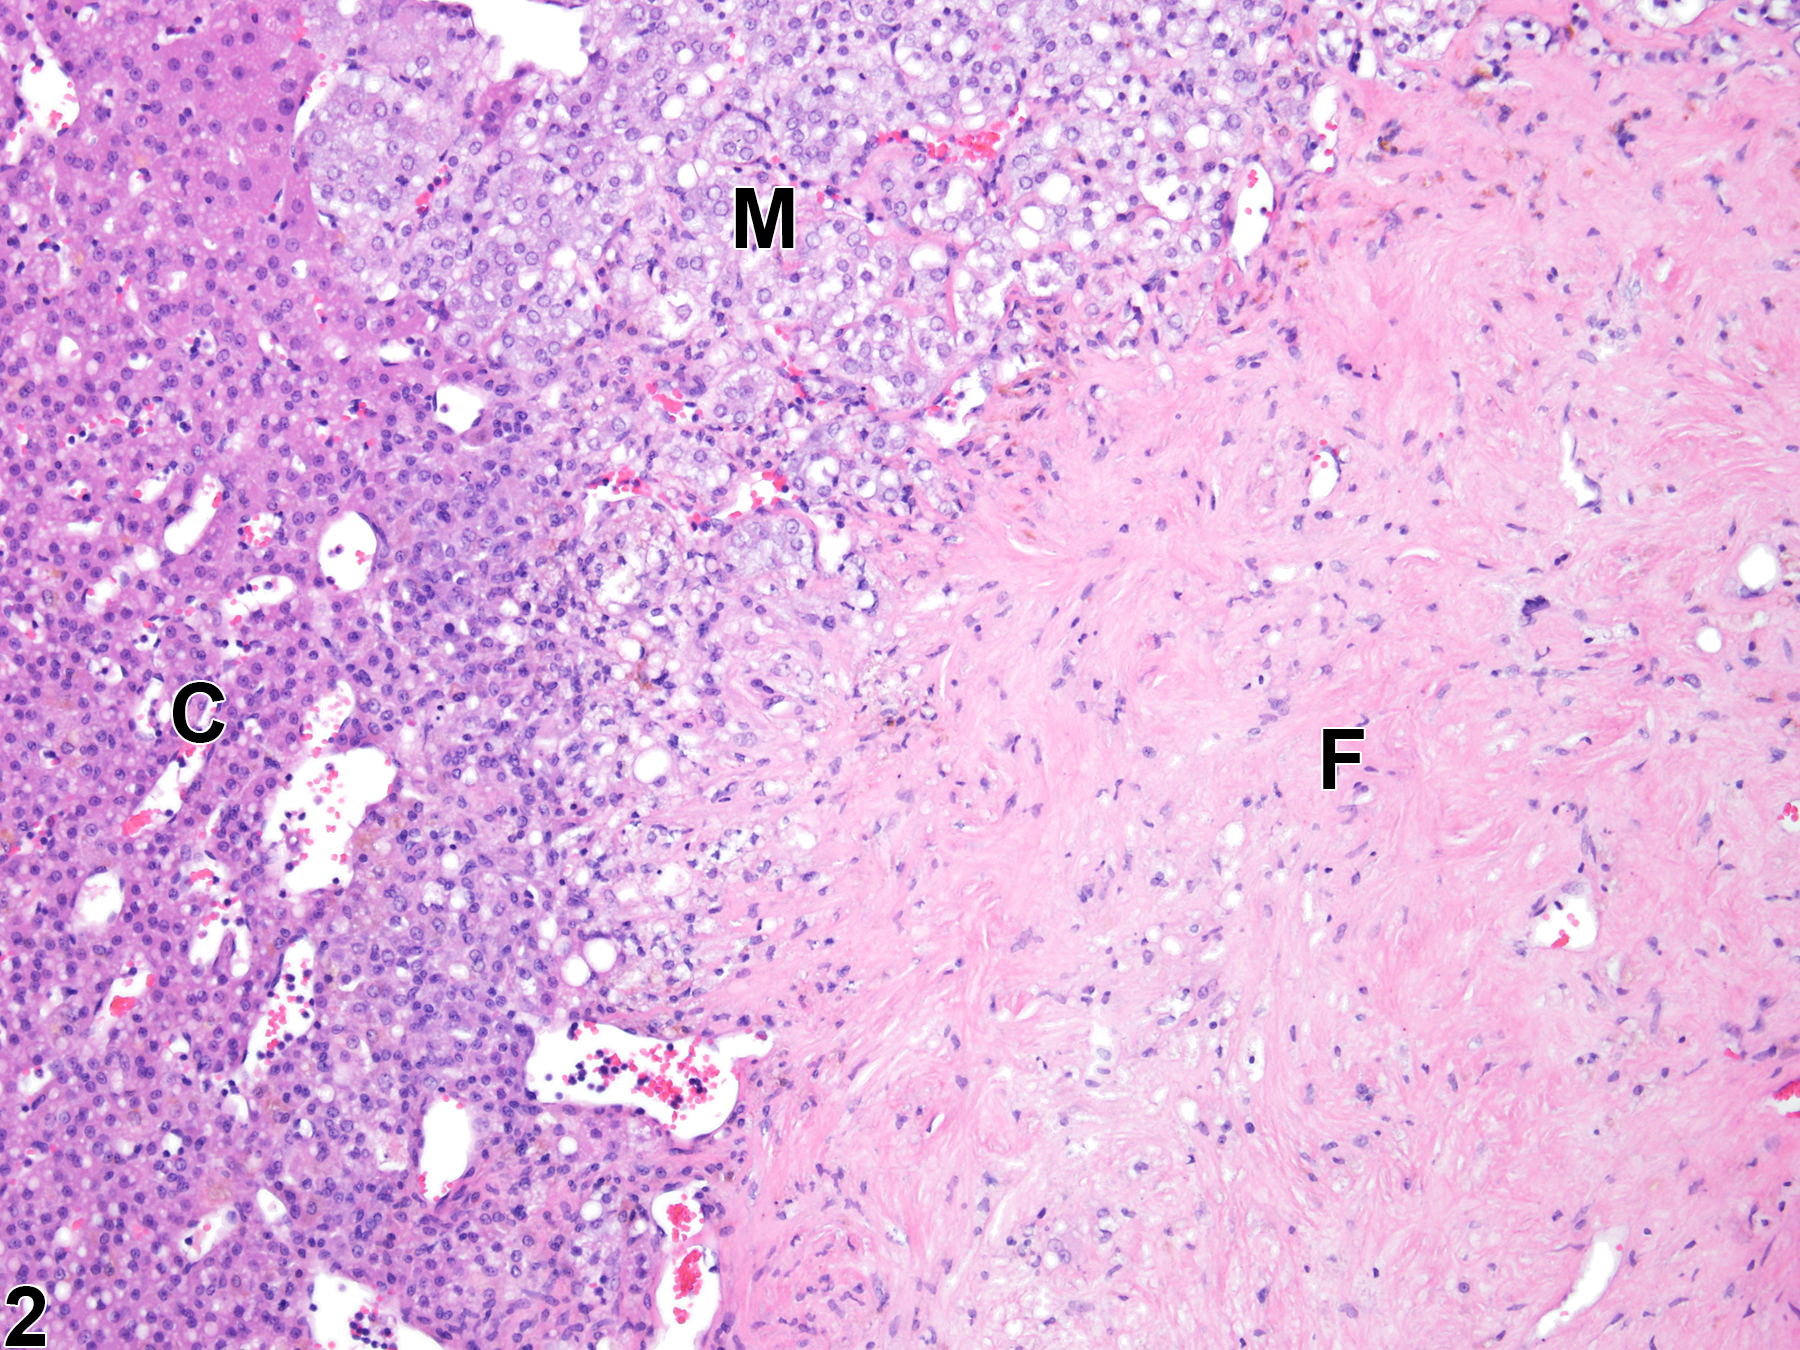 Image of fibrosis in the adrenal gland from a female F344/N rat in a chronic study